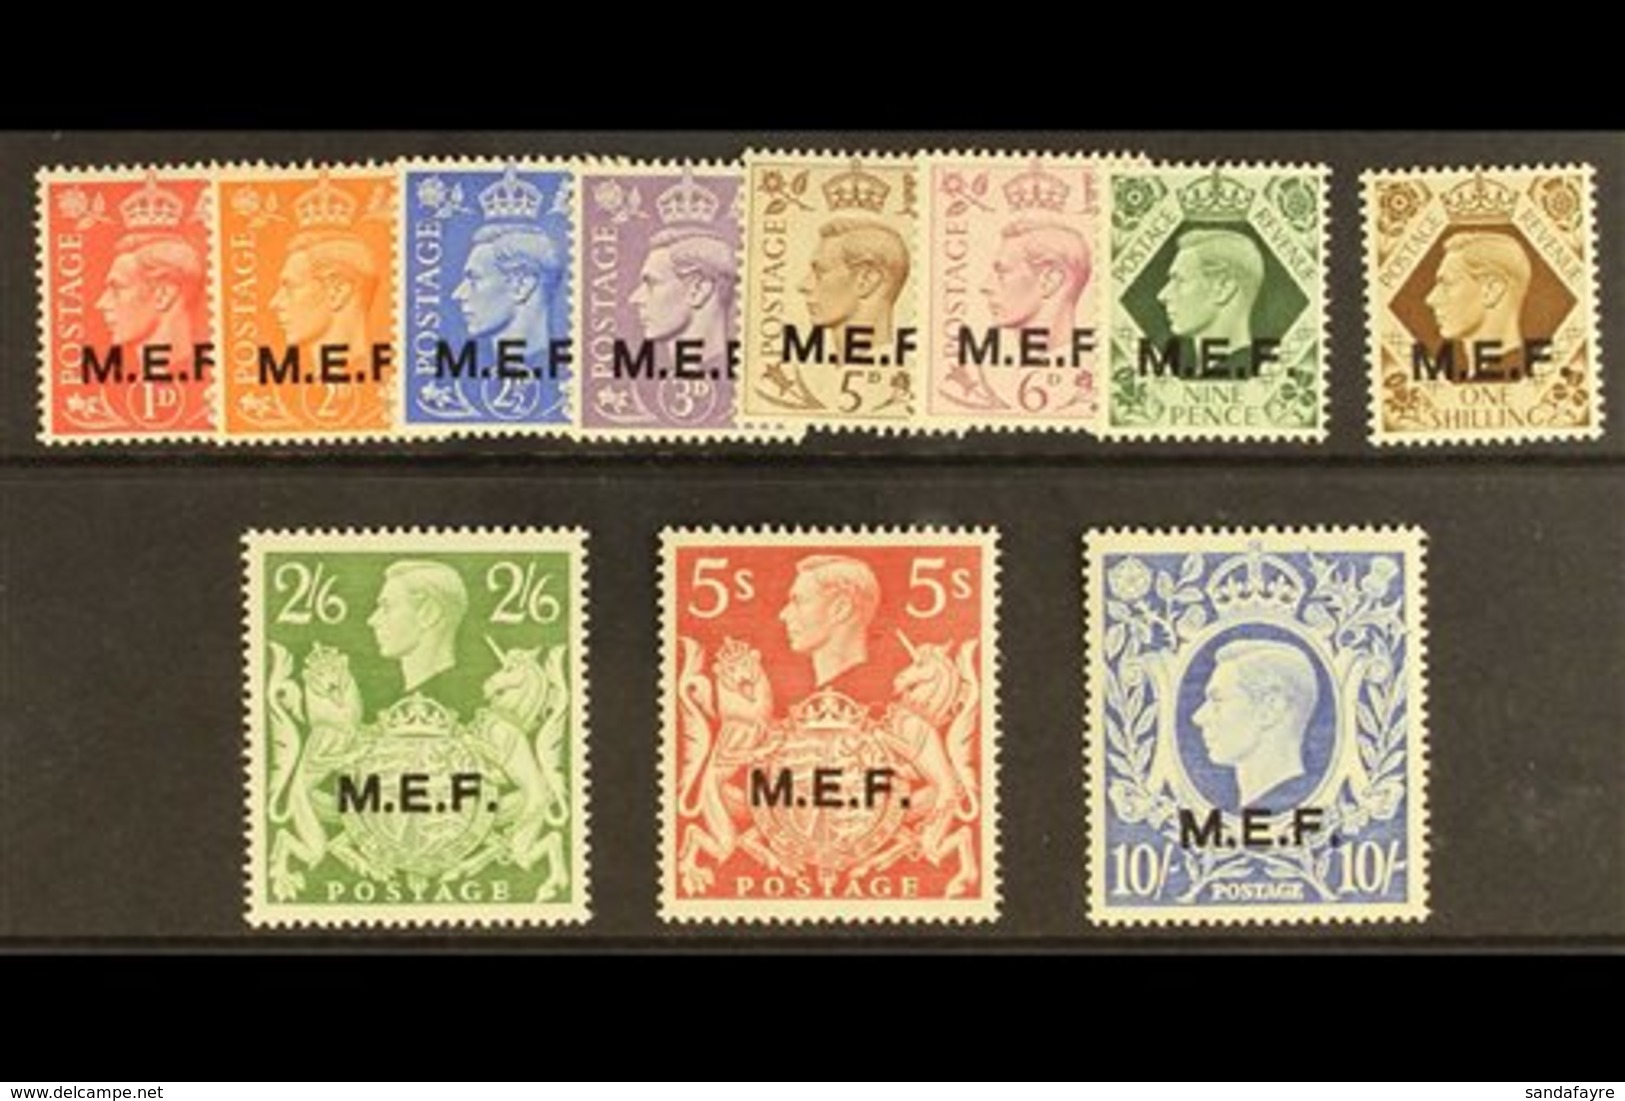 MIDDLE EAST FORCES  1943-47 "M.E.F." Overprints Complete Set, SG M11/M21, Never Hinged Mint. (11 Stamps) For More Images - Italiaans Oost-Afrika